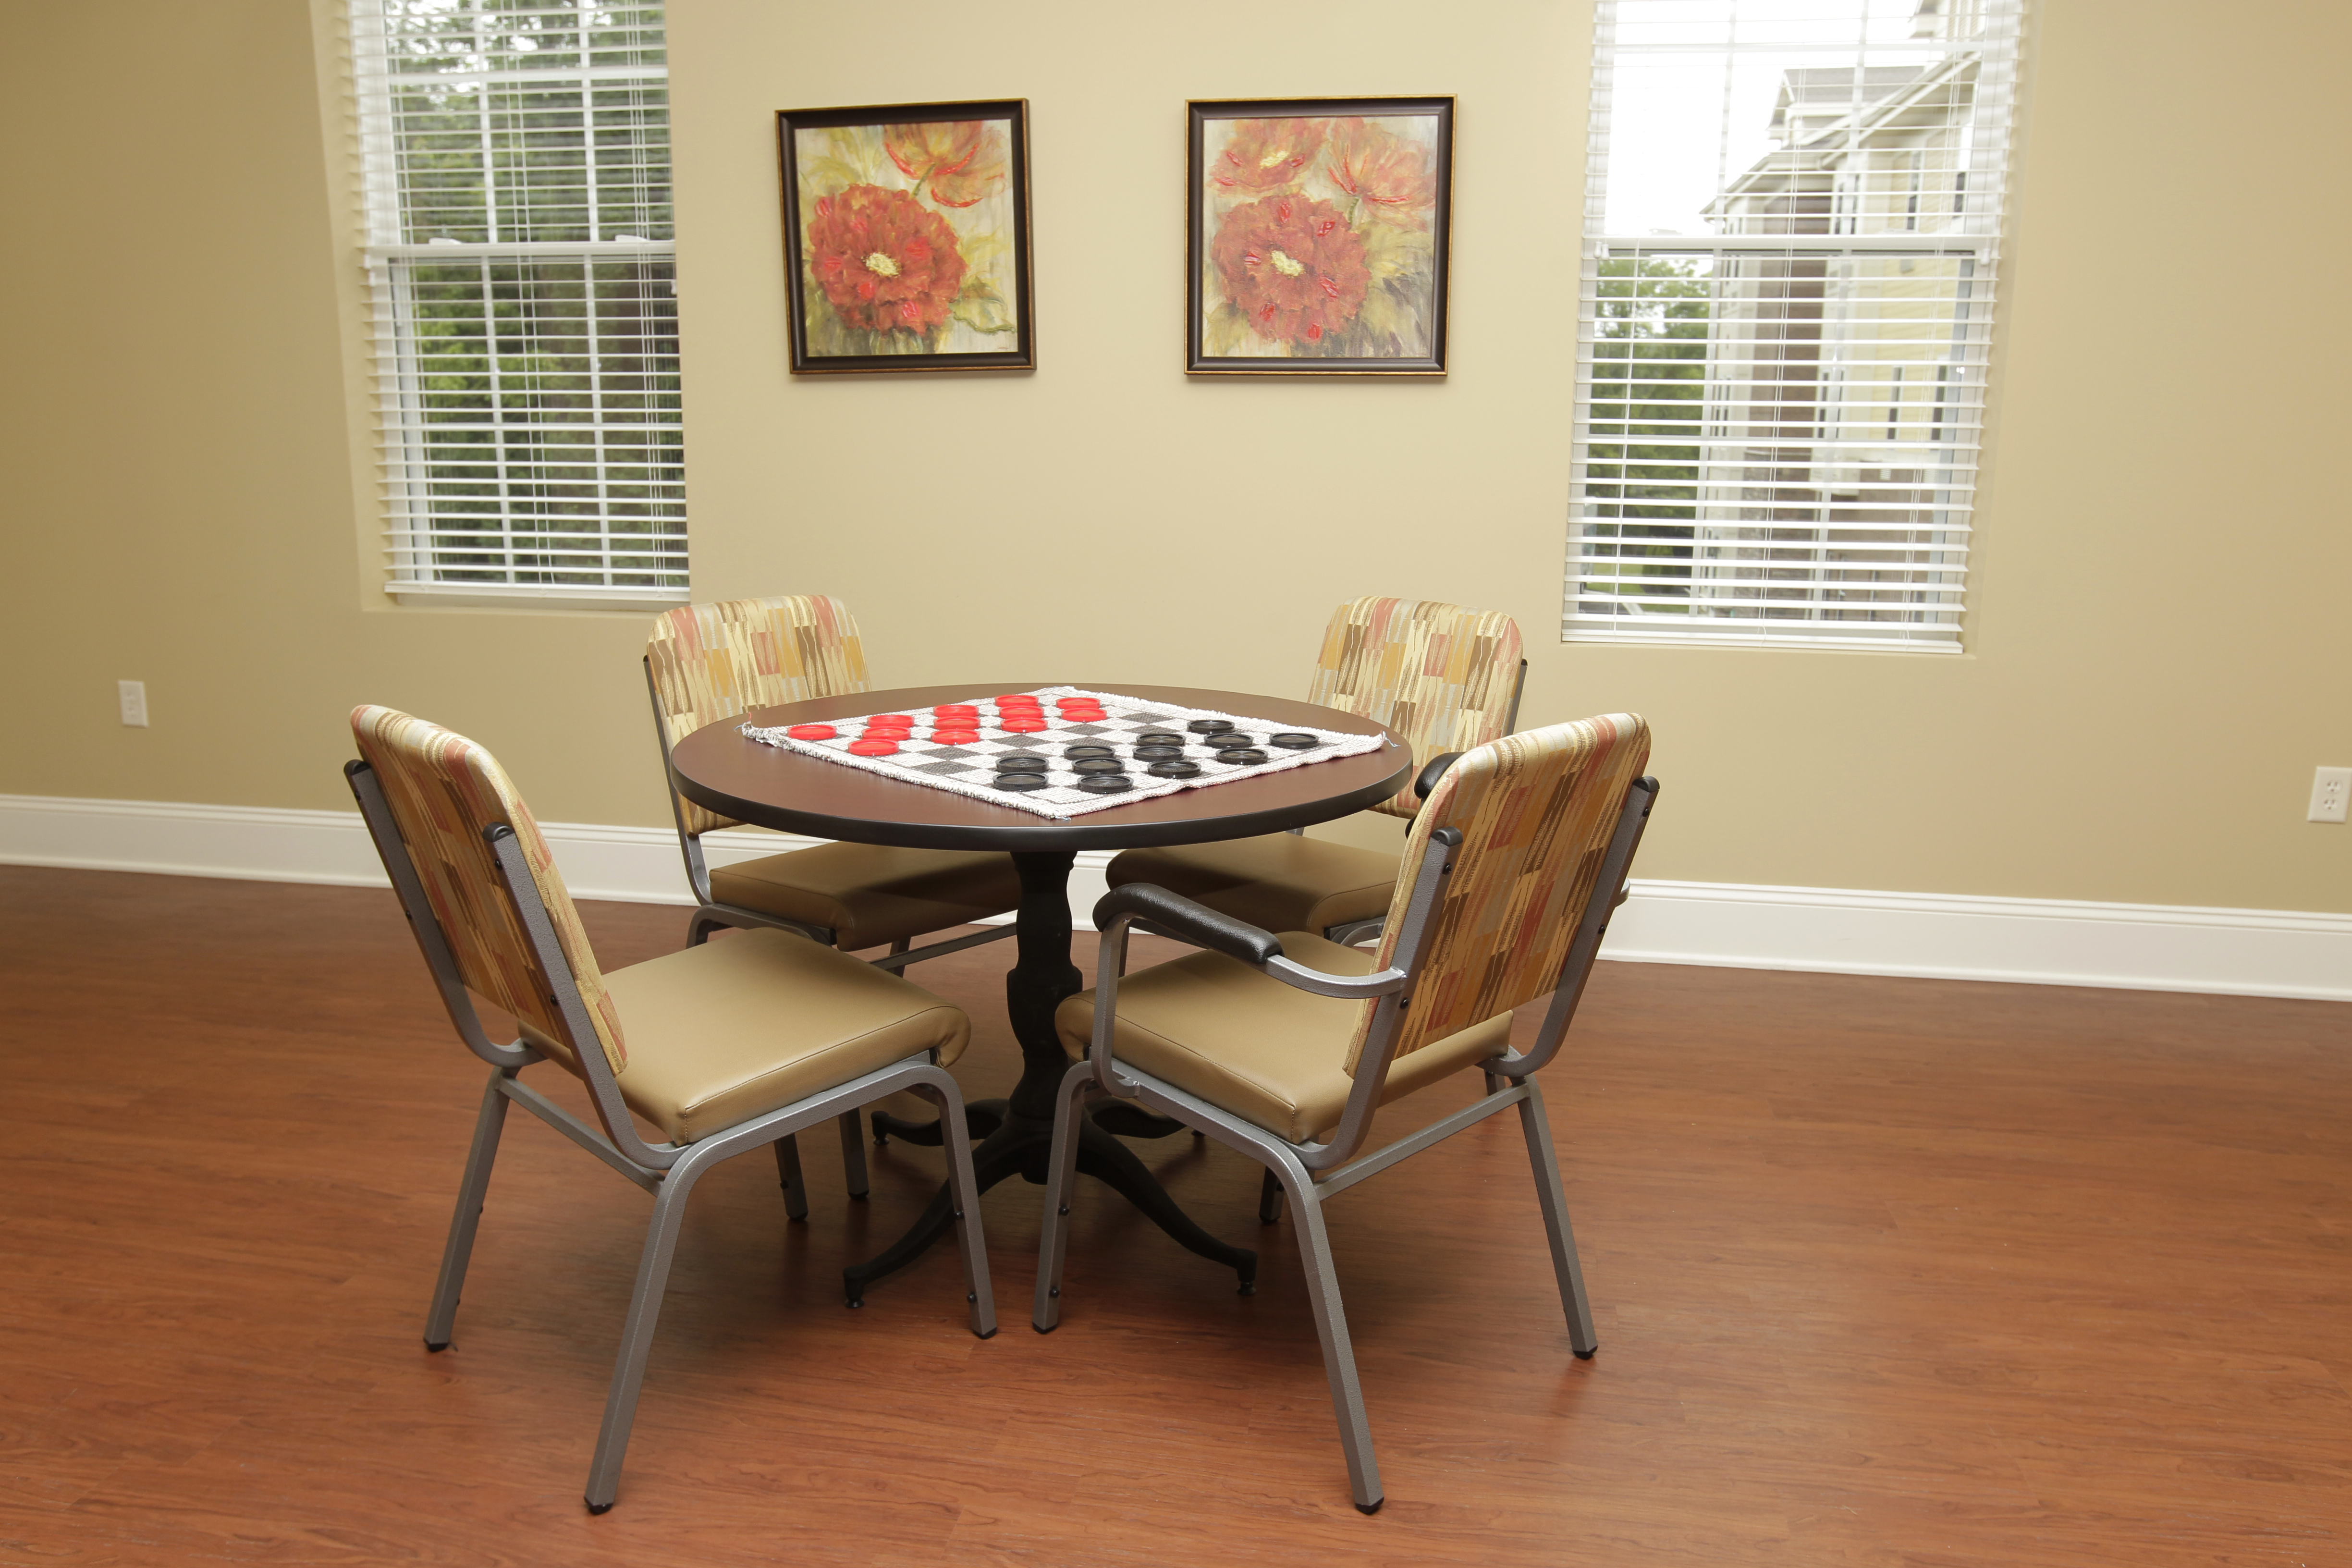 Checkers table